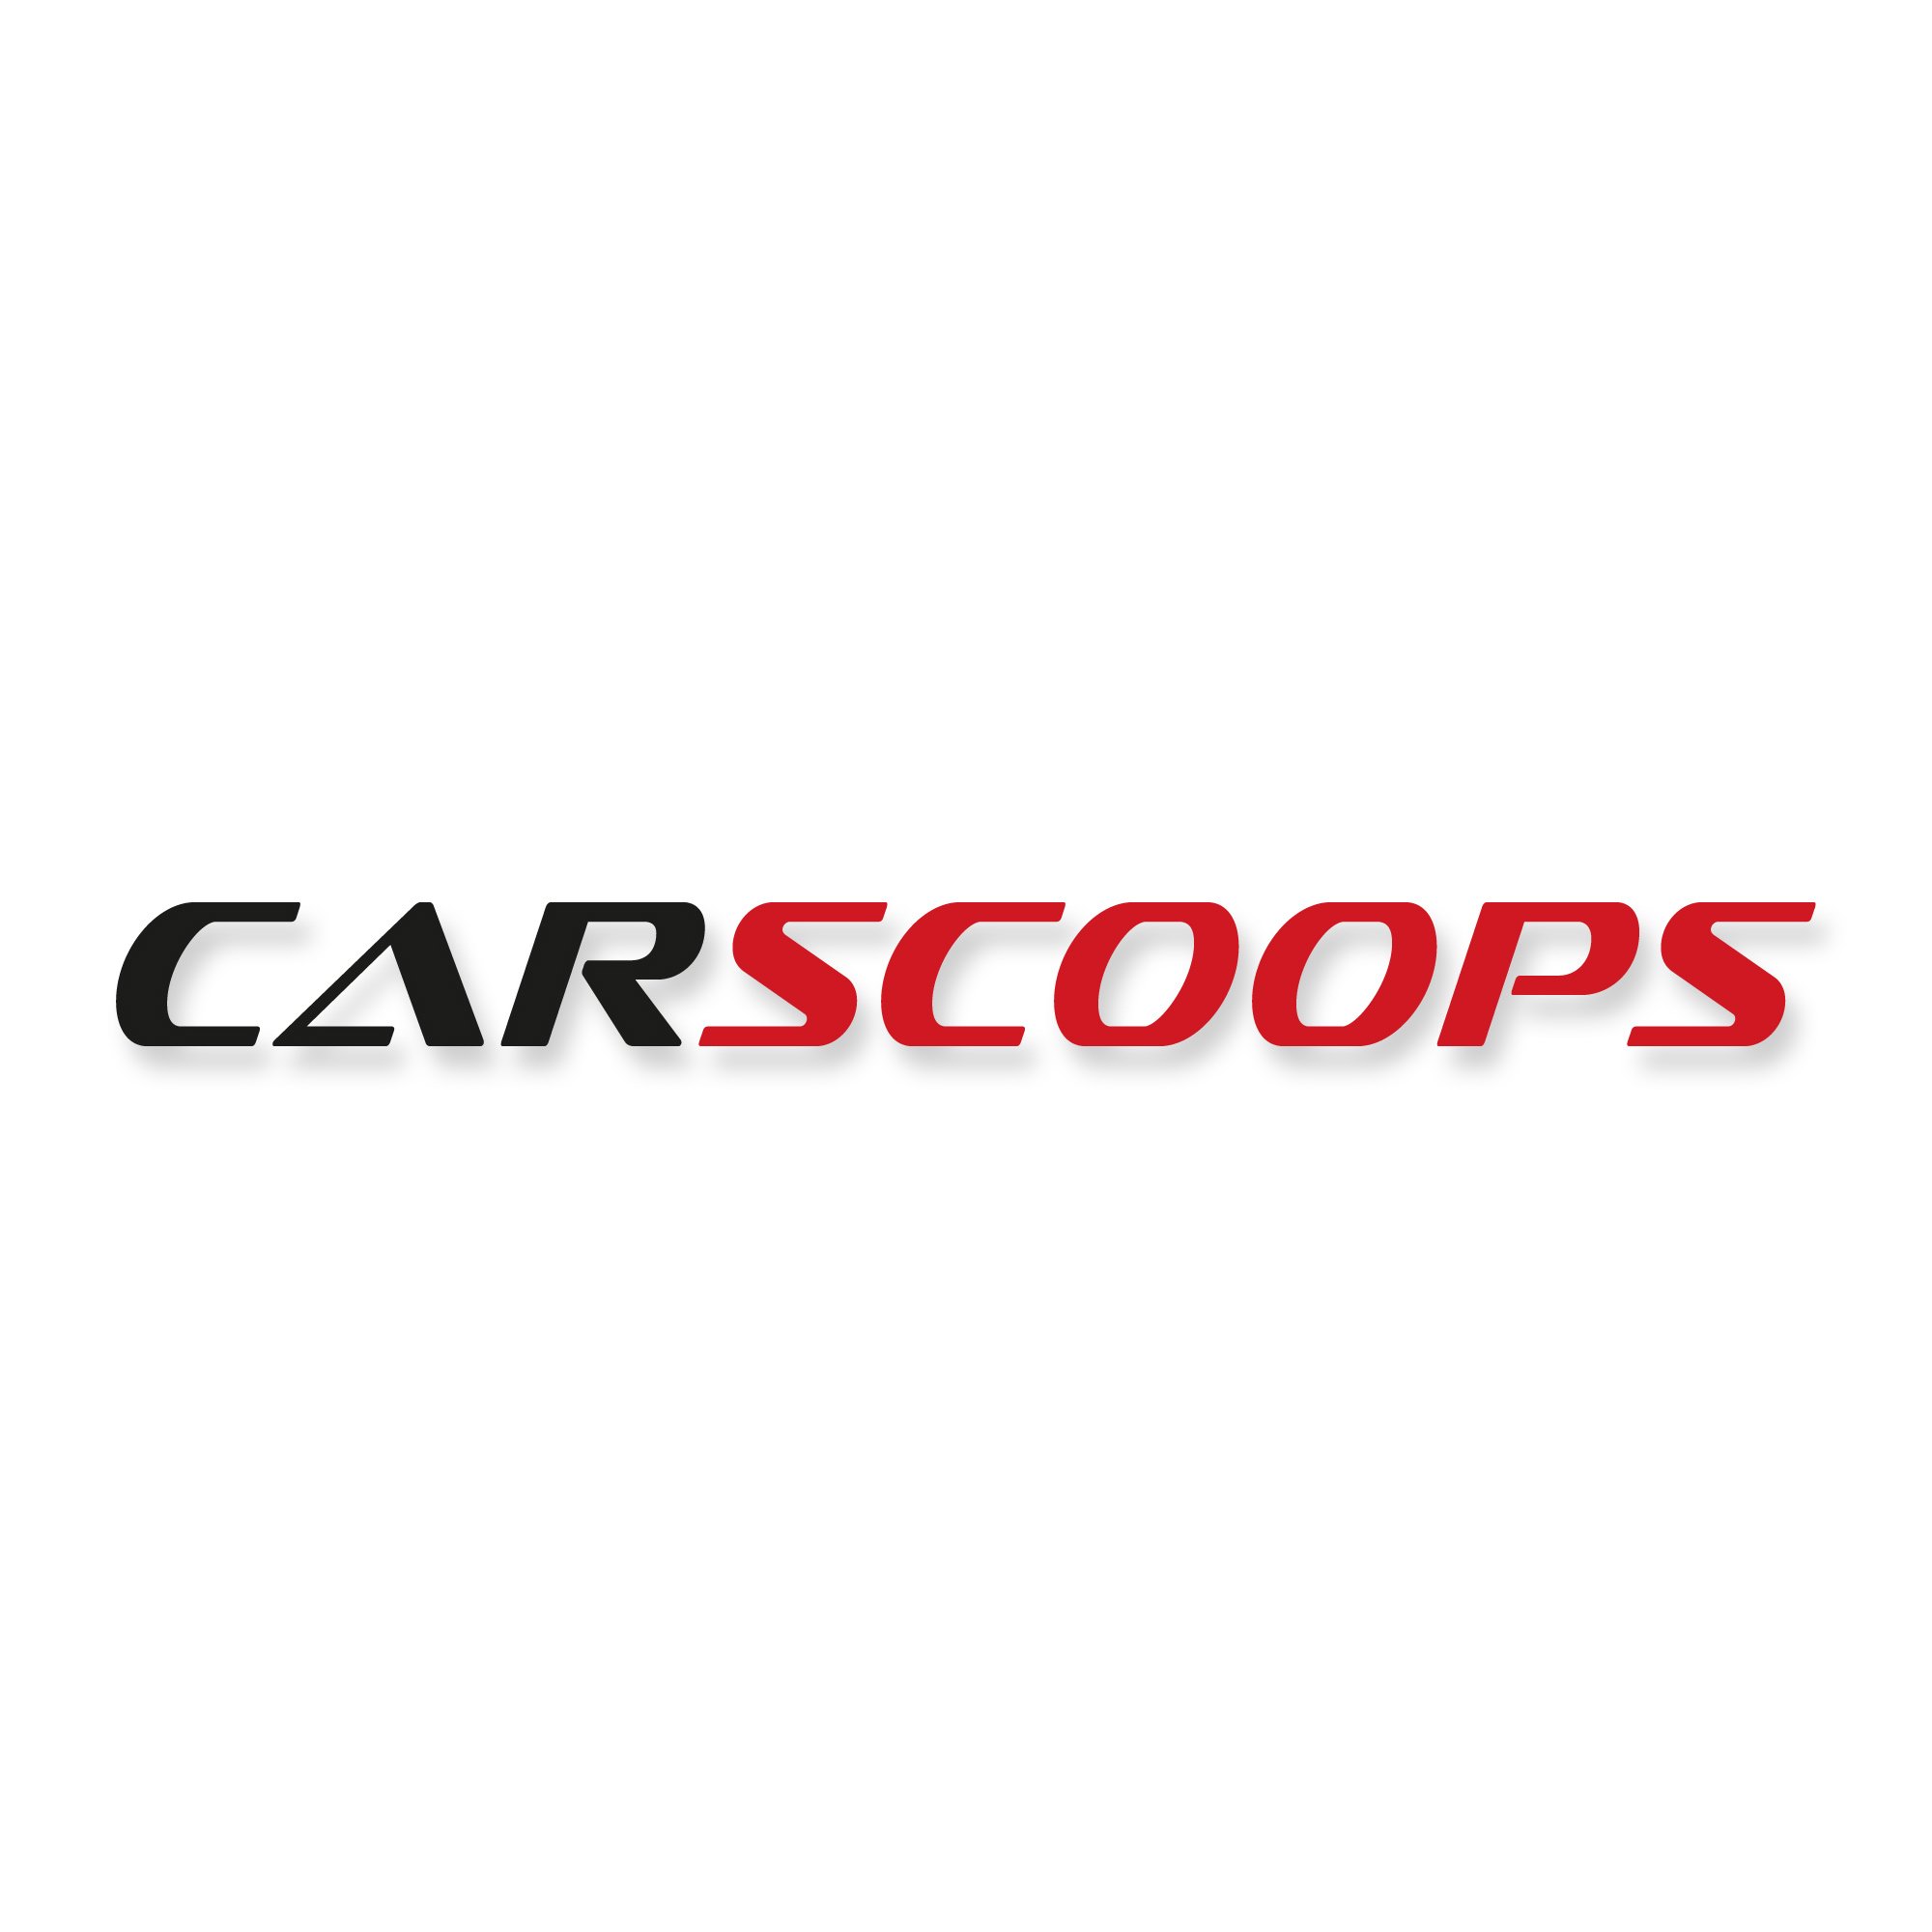 CARSCOOPS